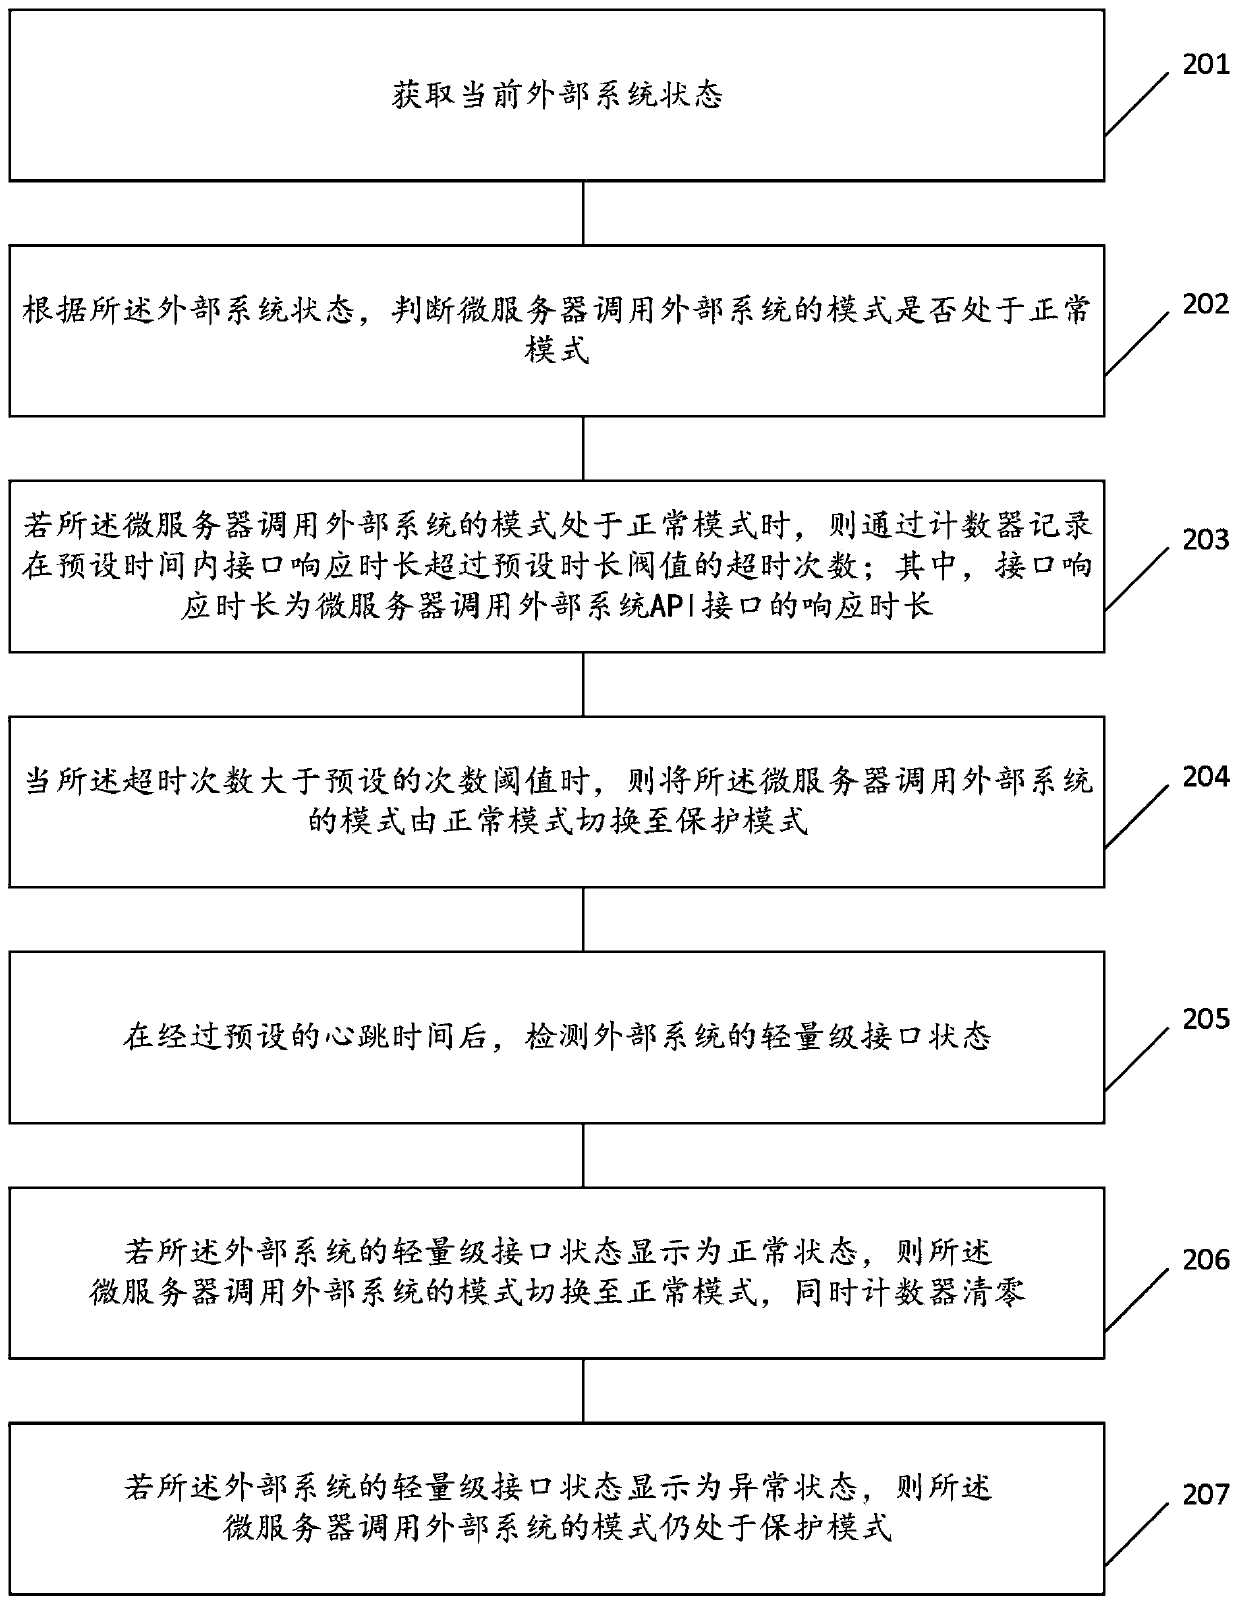 Fusing method suitable for micro server and external system